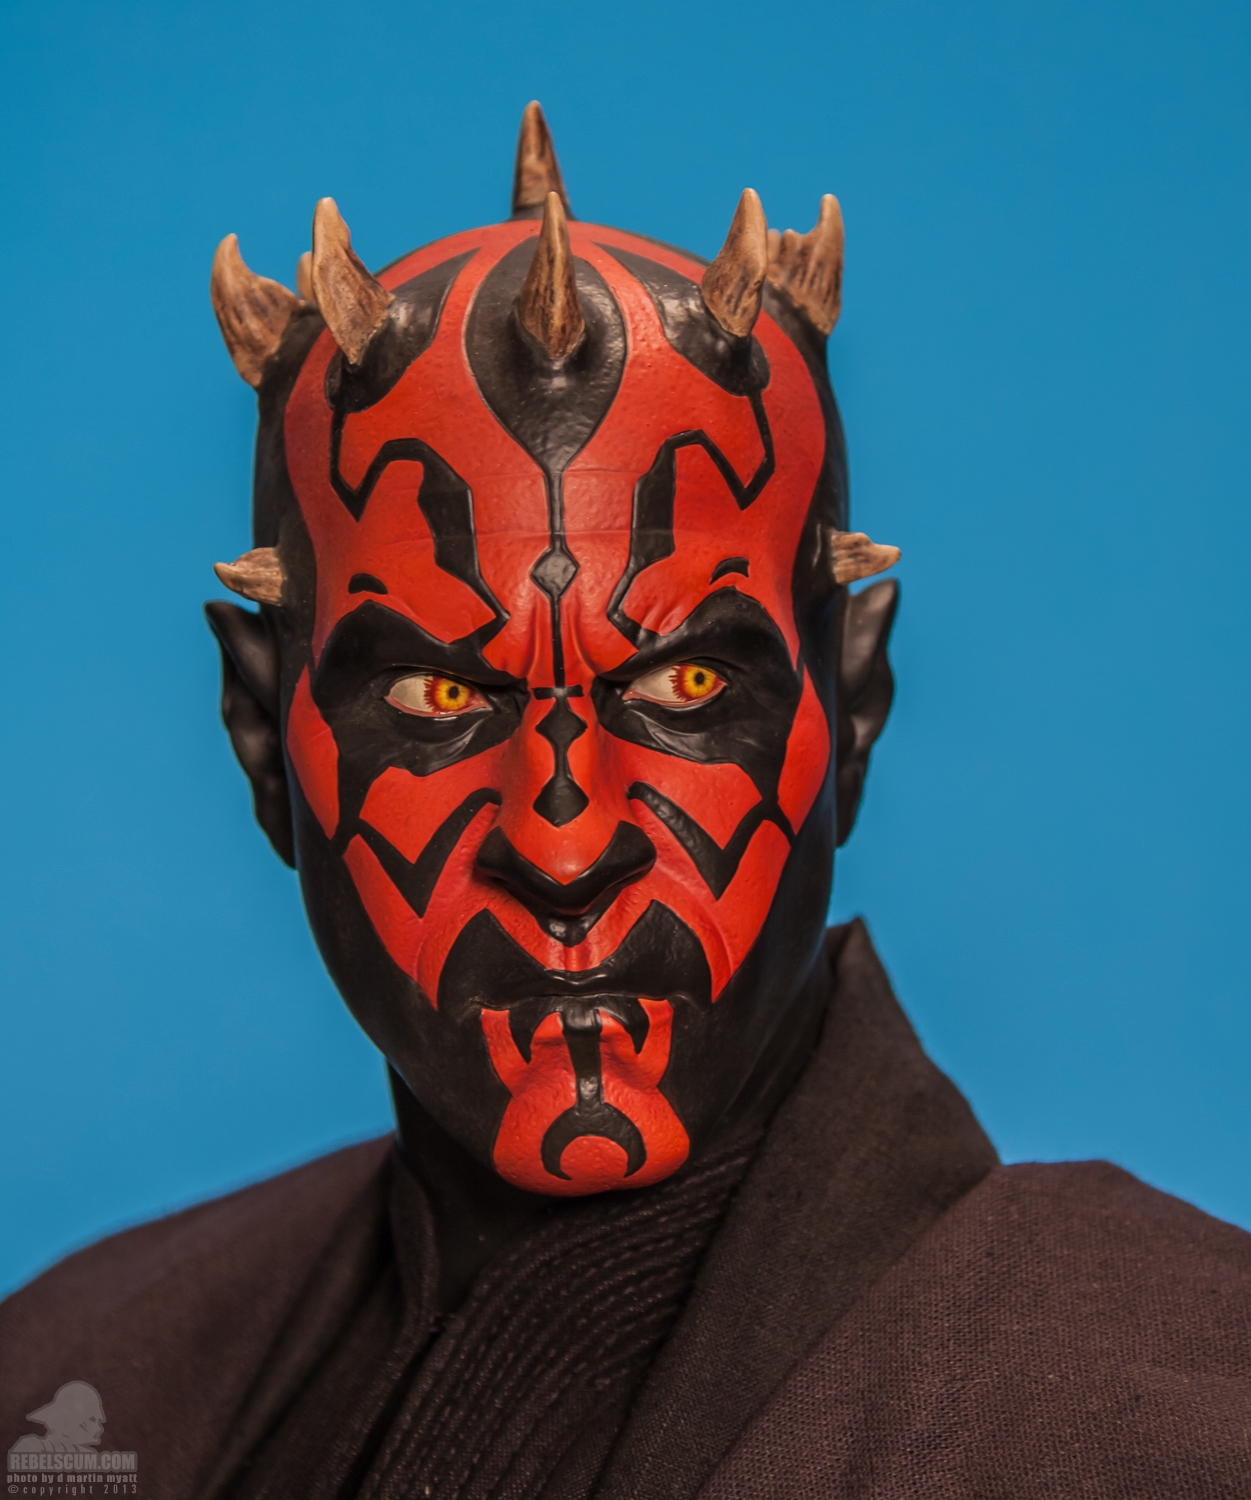 Darth_Maul_Legendary_Scale_Figure_Sideshow_Collectibles-13.jpg